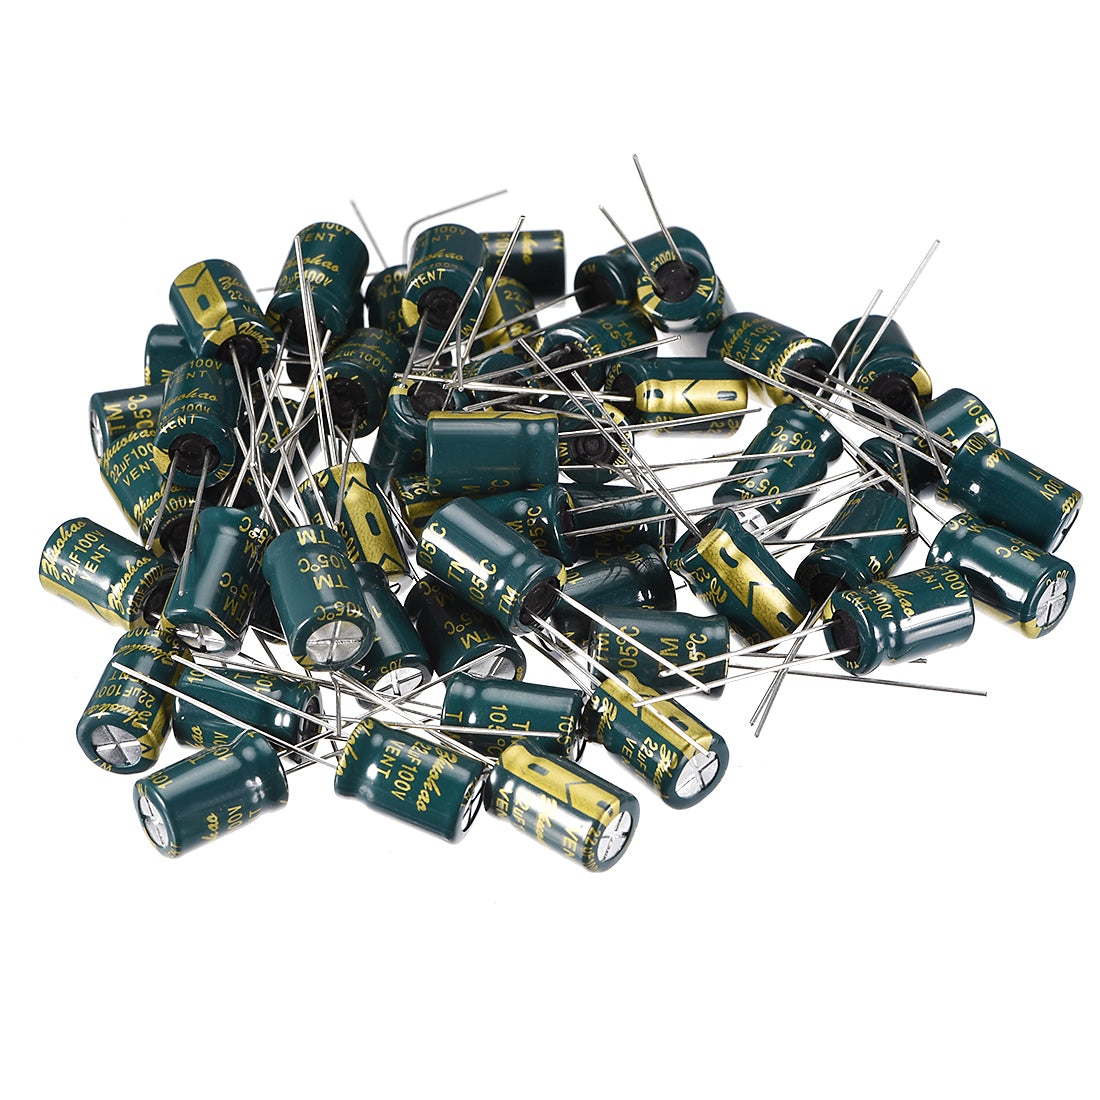 uxcell Uxcell Aluminum Radial Electrolytic Capacitor Low ESR Green with 22uF 100V 105 Celsius Life 3000H 8 x 12 mm High Ripple Current,Low Impedance 50pcs